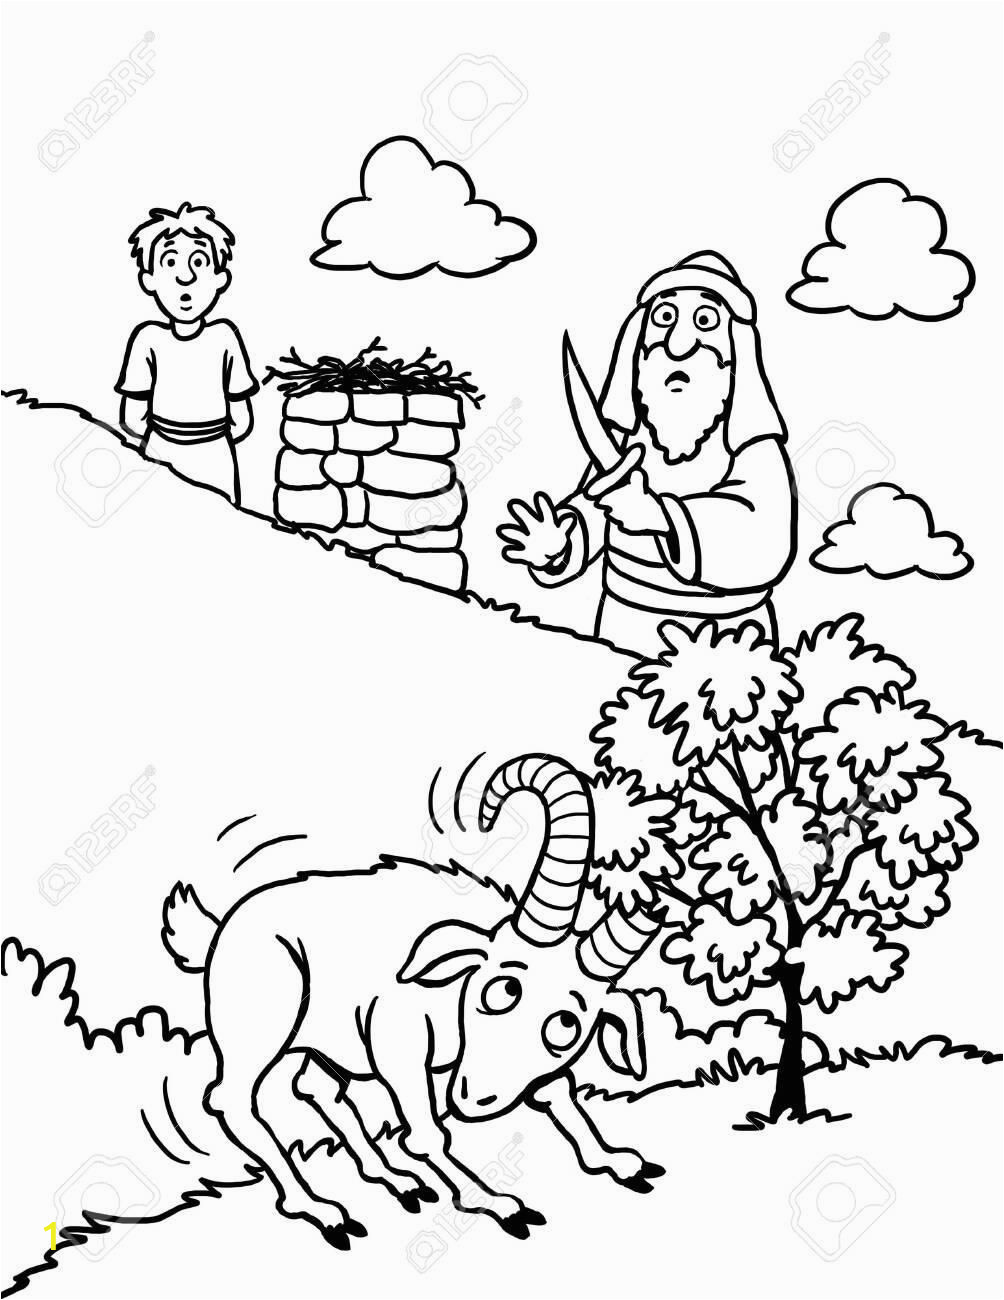 Abraham and isaac Coloring Pages Free Coloring Page Abraham and isaac